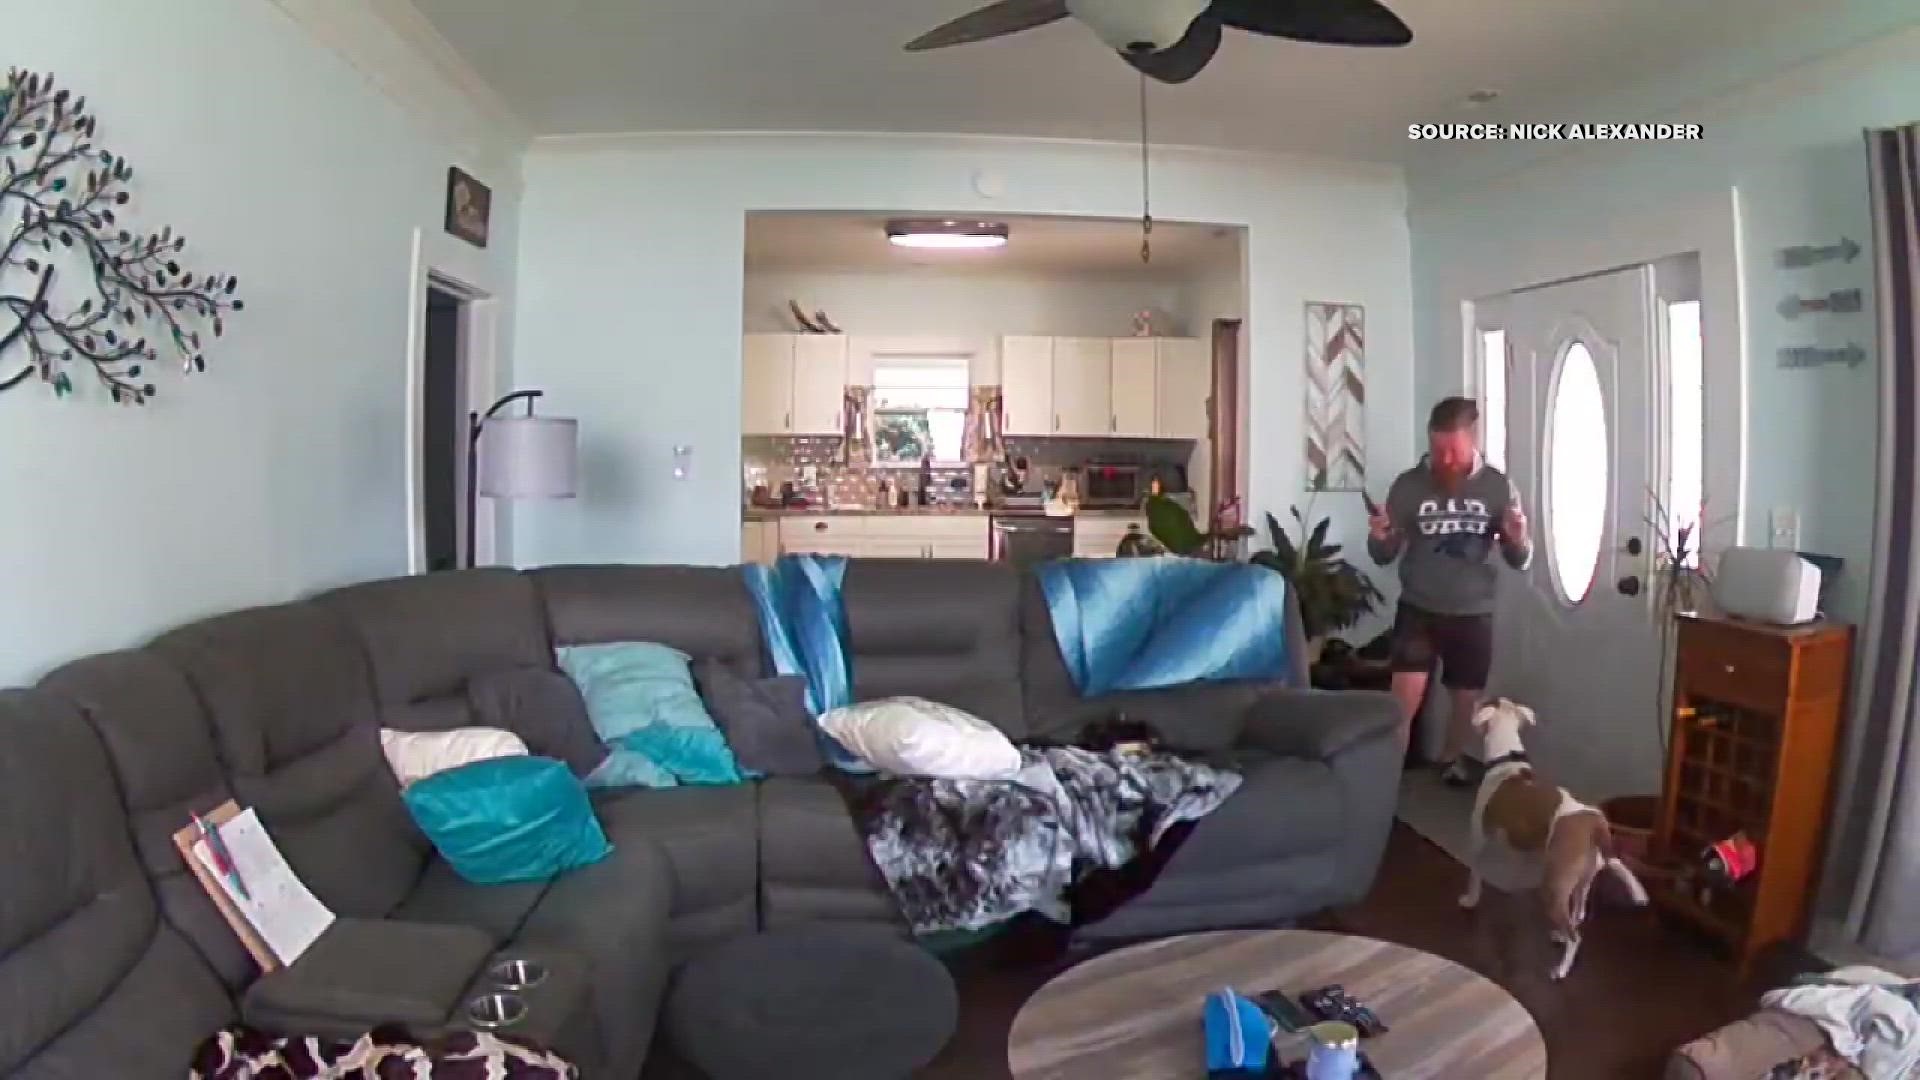 Panthers' fan Nick Alexander's security camera captured the moment he found out about the news.